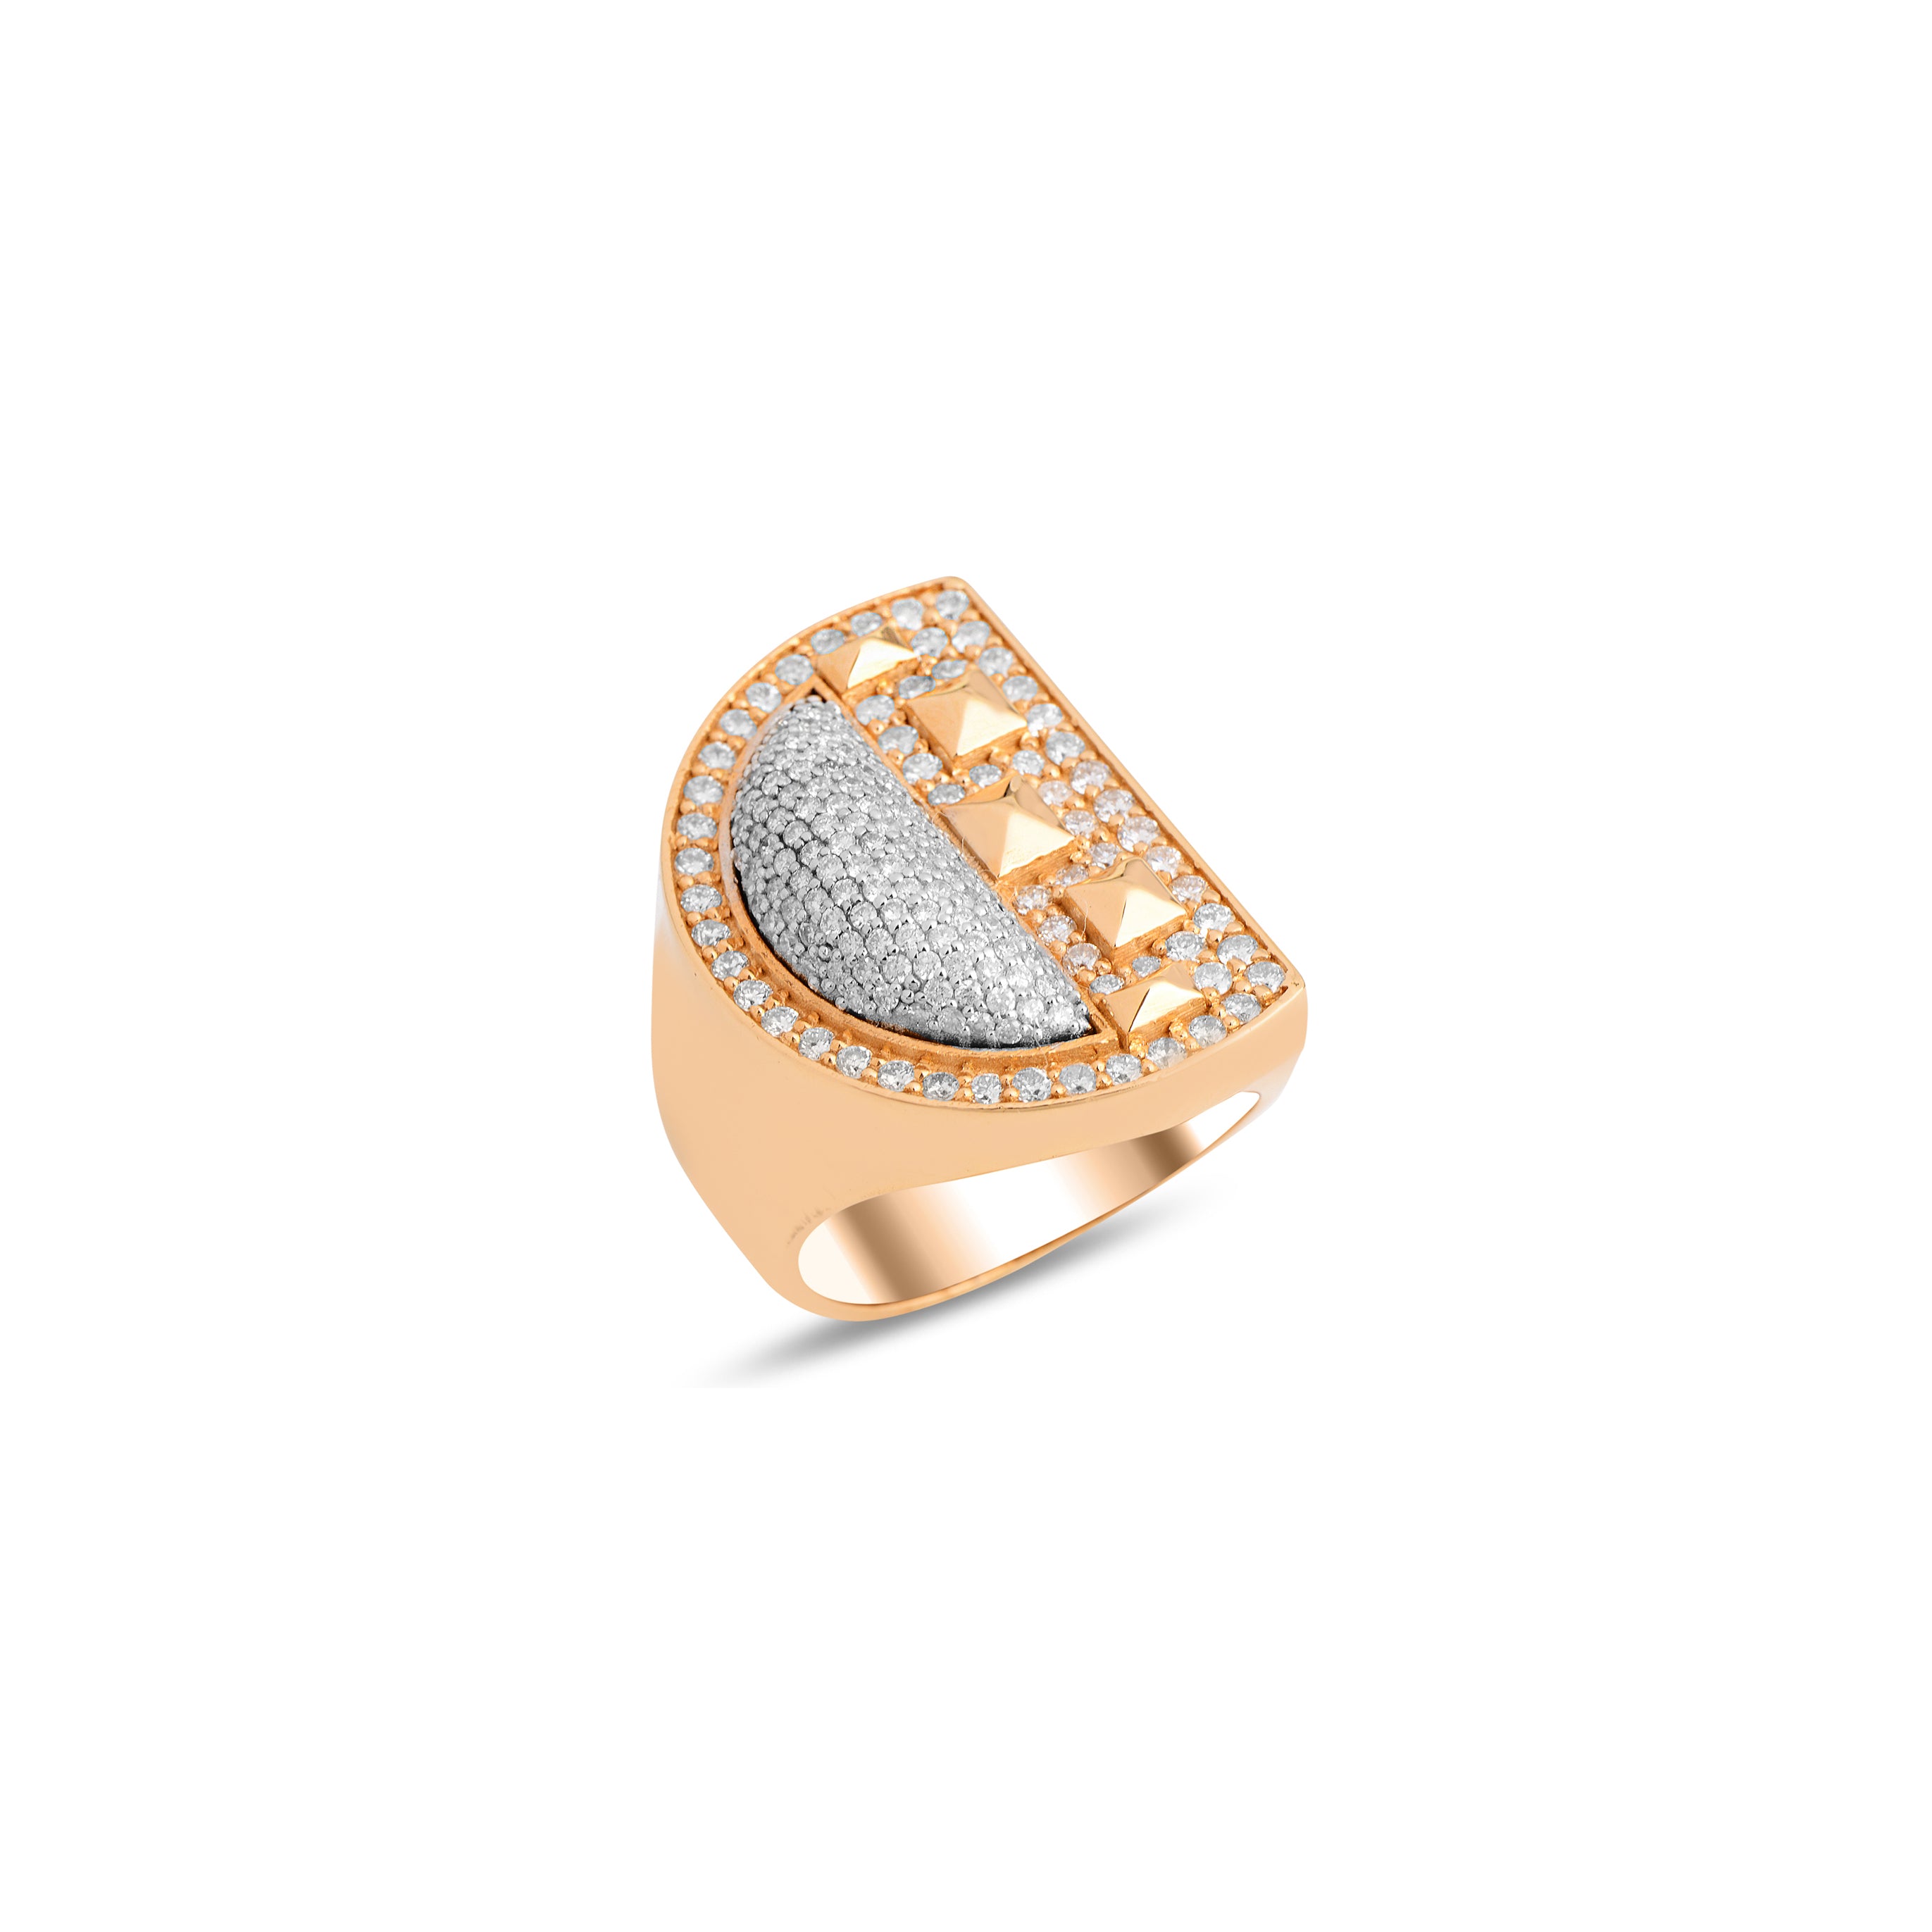 Neutra Cairo Colorless Ring - All Diamonds Pave